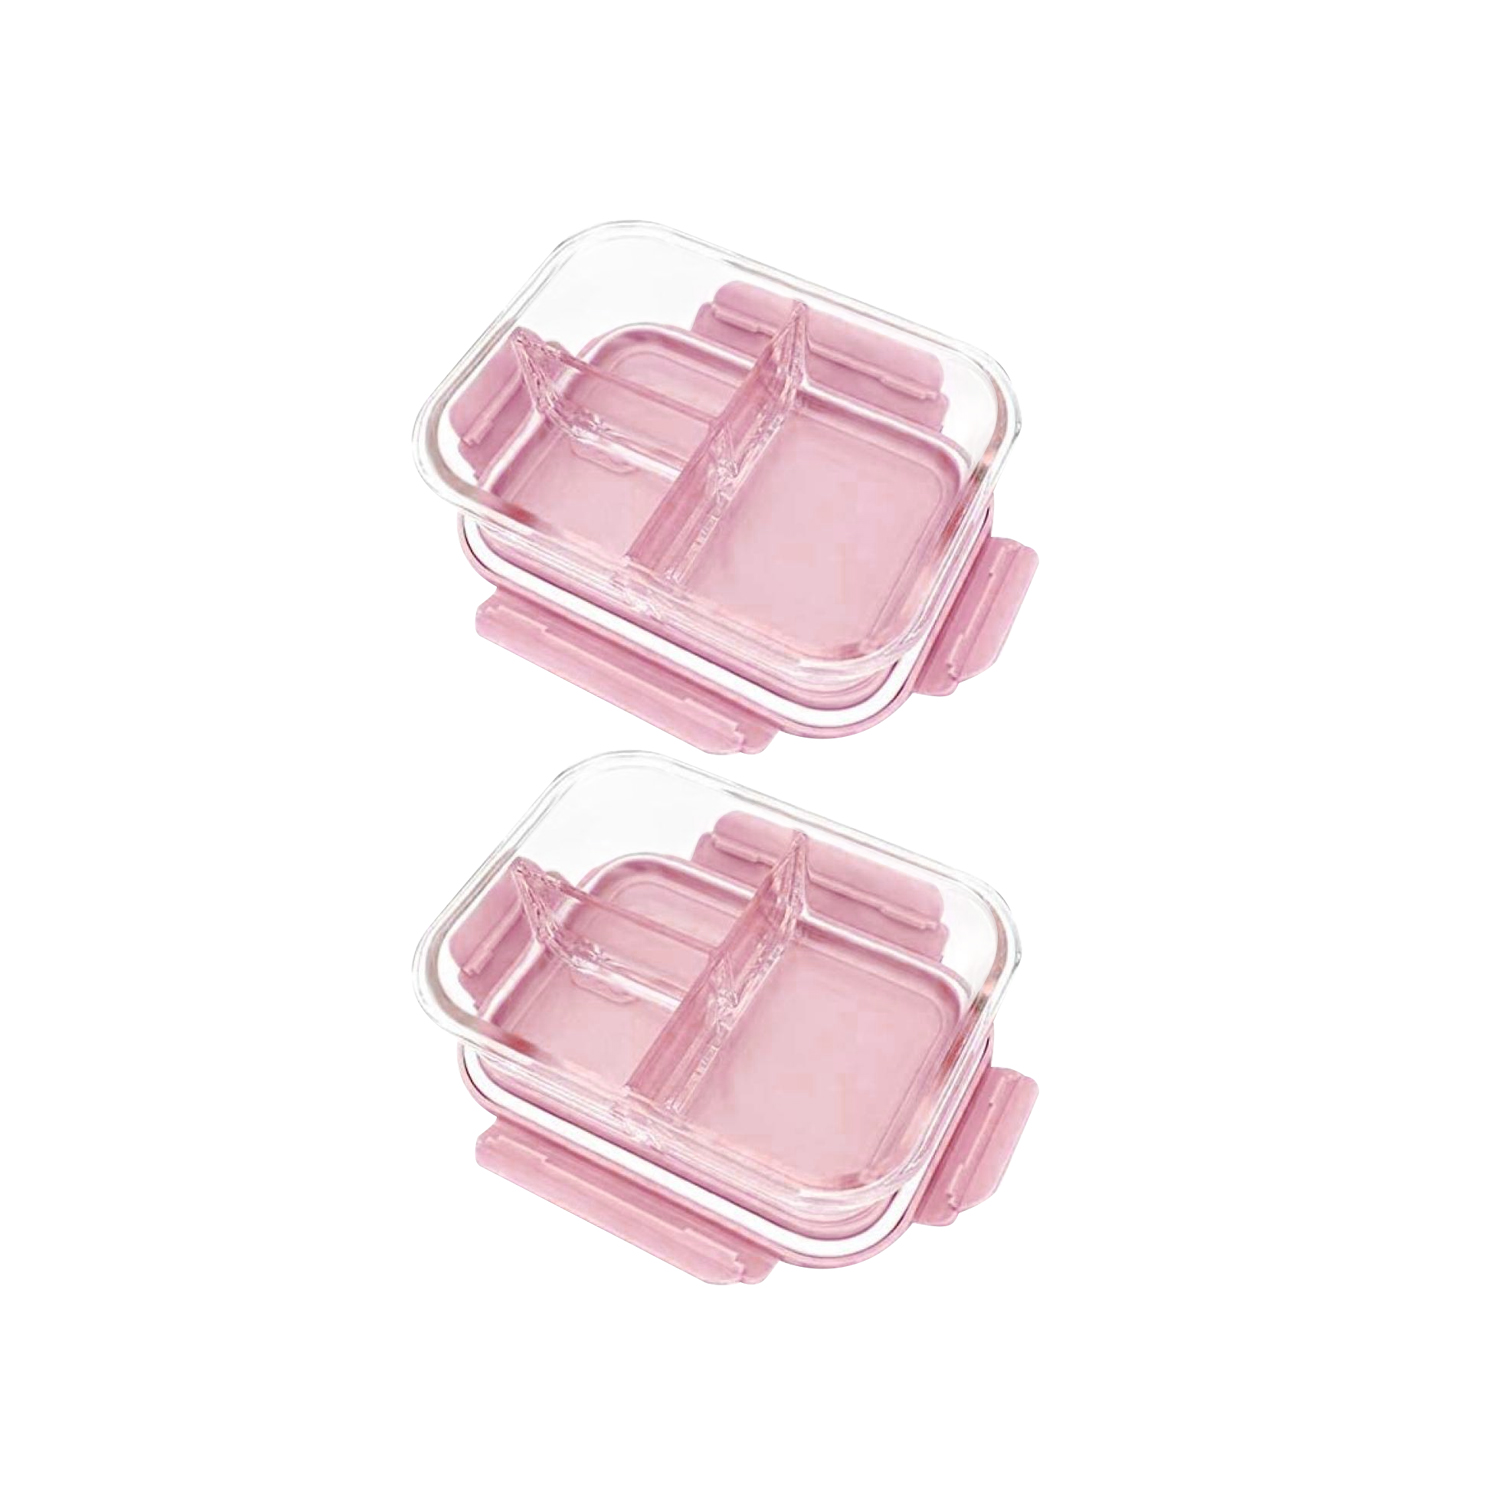 Aiwanto 2 Pack Glass Lunch Box Glass Containers Glass Storage Box Food Container for Office (Pink)